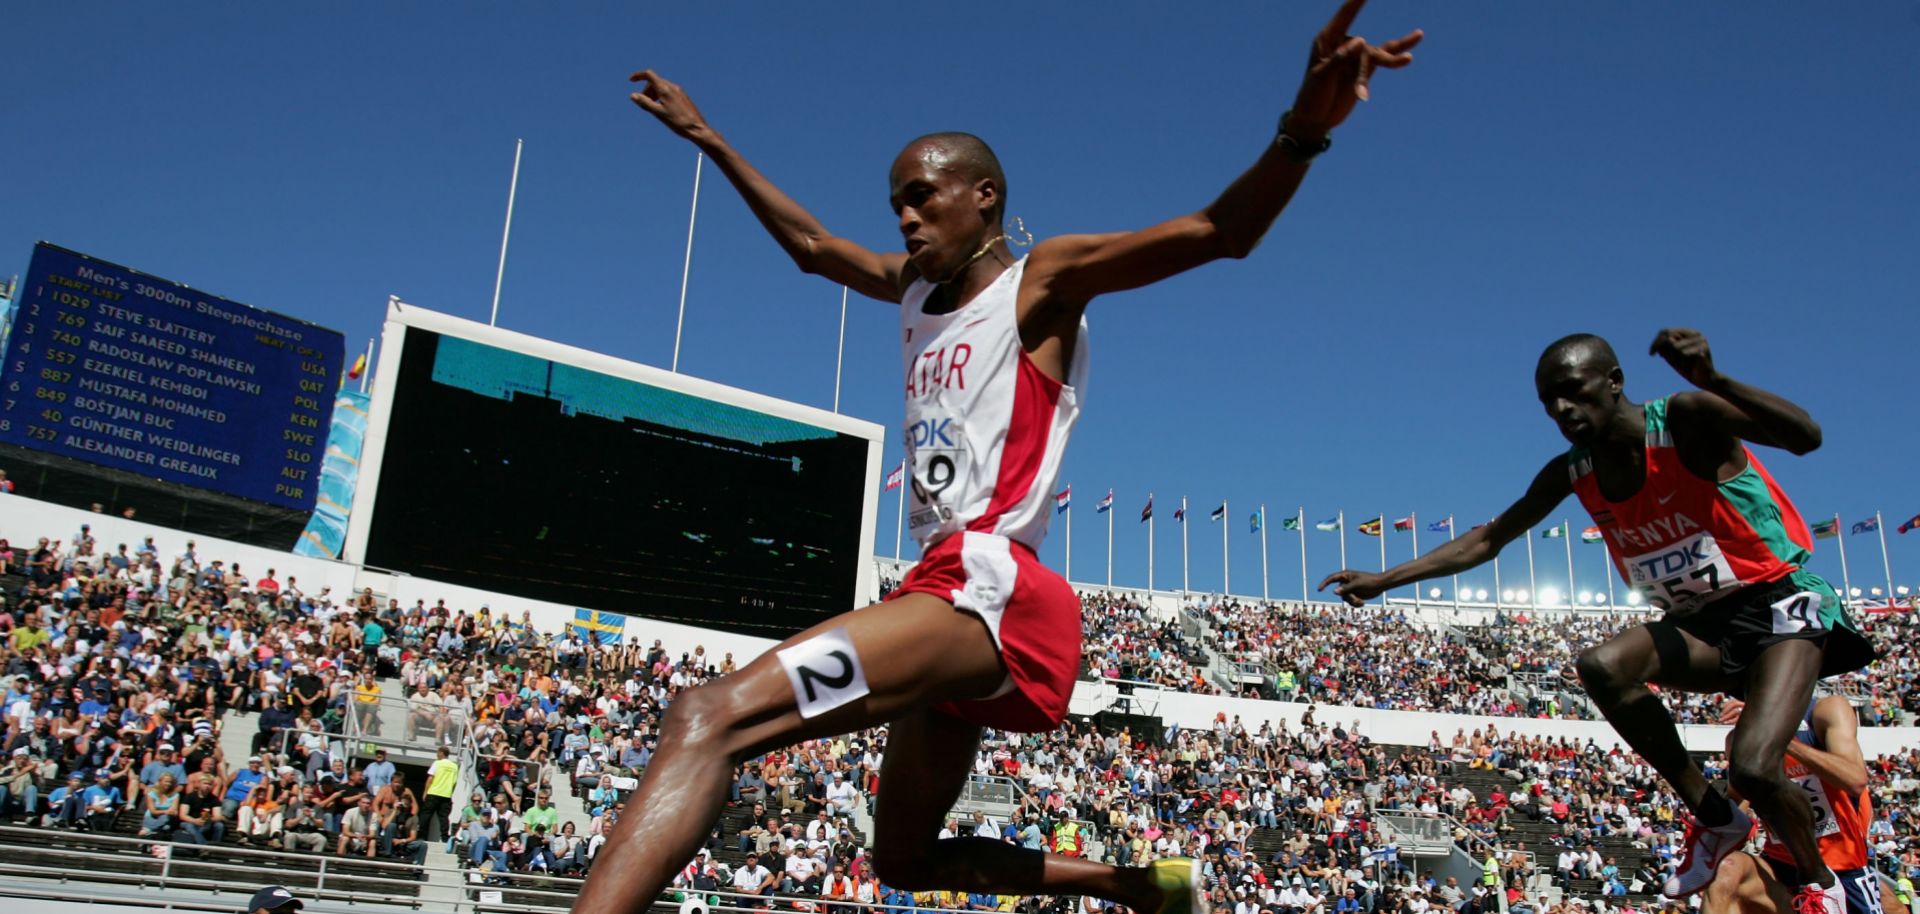 Before he became a Qatari citizen to compete in international track and field competitions for the country, Saif Saaeed Shaheen was a Kenyan named Stephen Cherono.